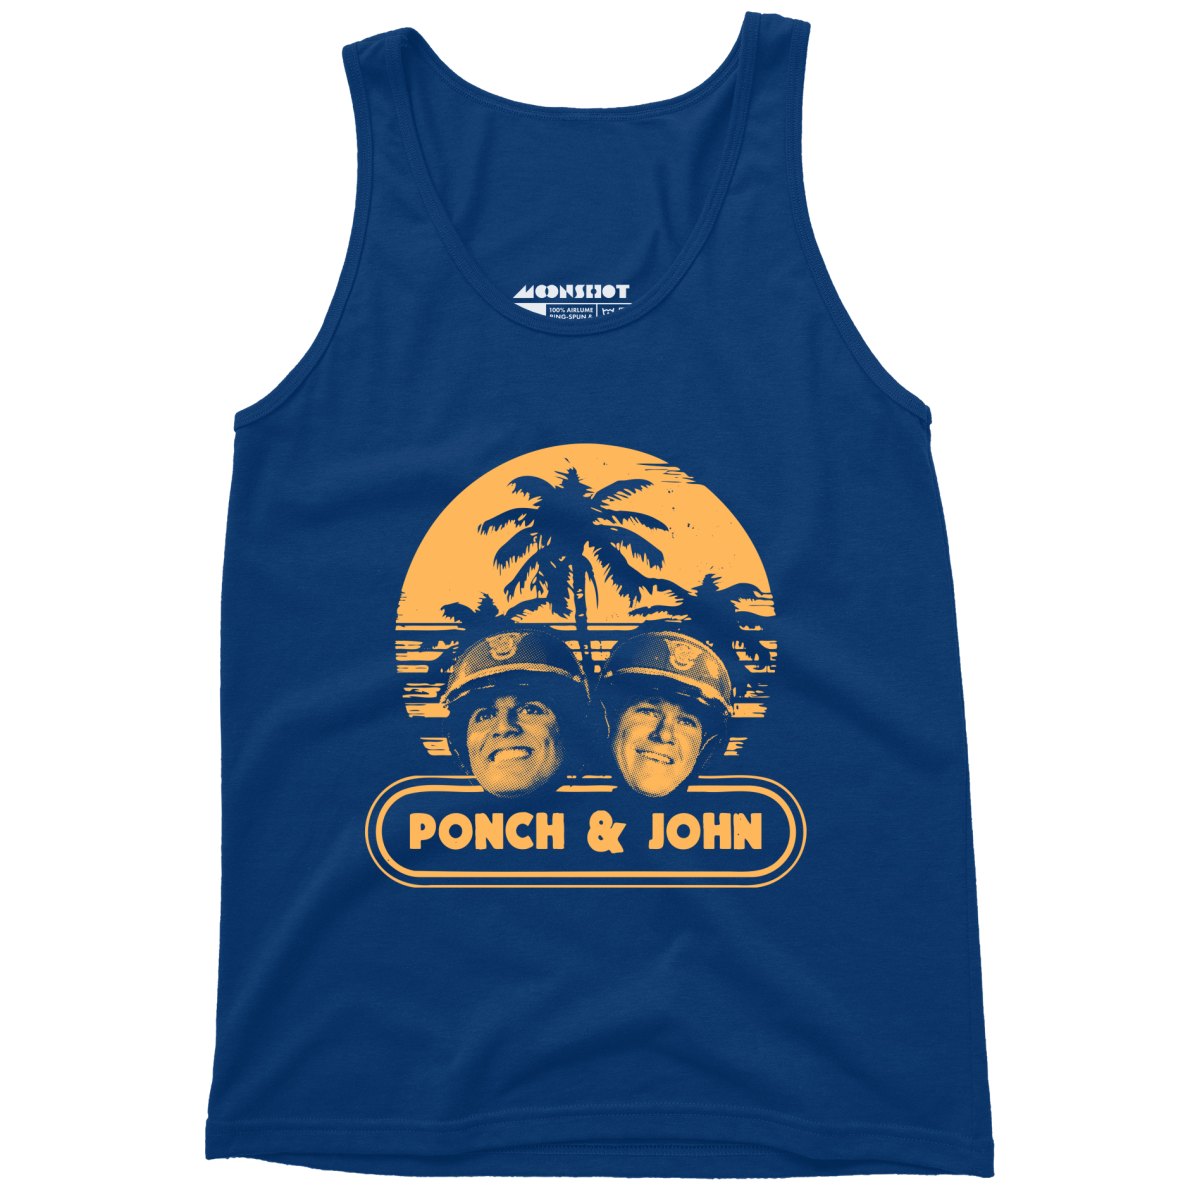 Ponch and John - Unisex Tank Top